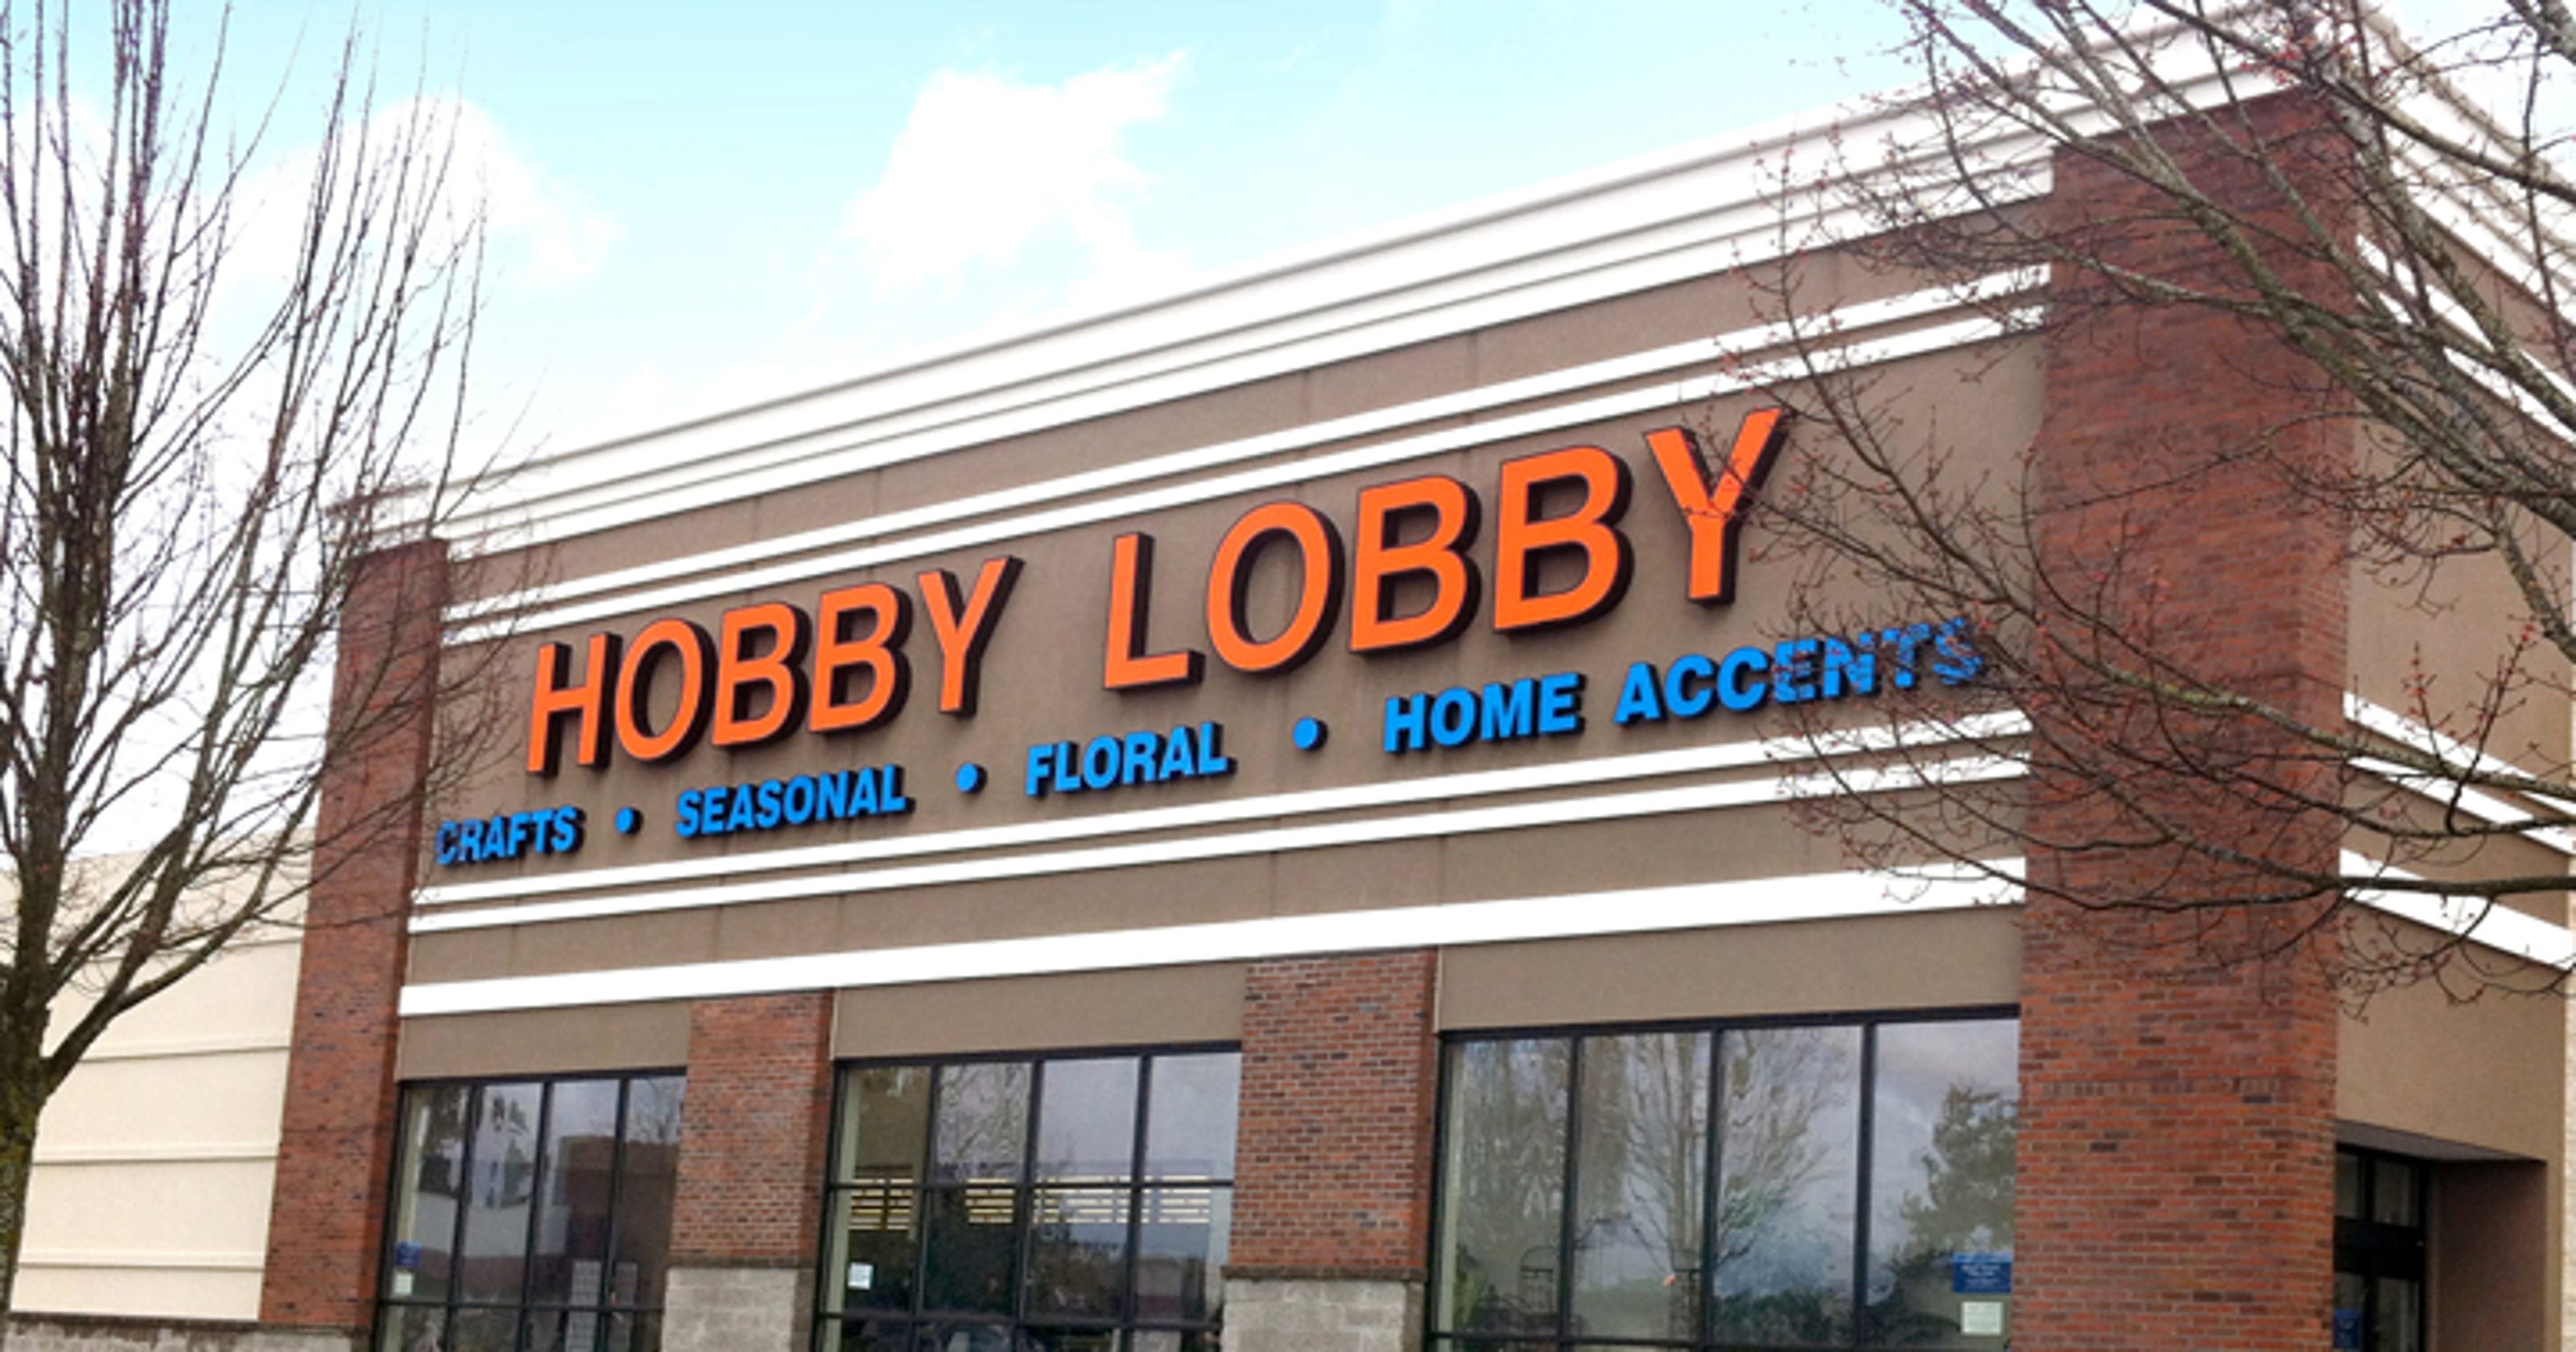 West Des Moines to get a Hobby Lobby store in early March